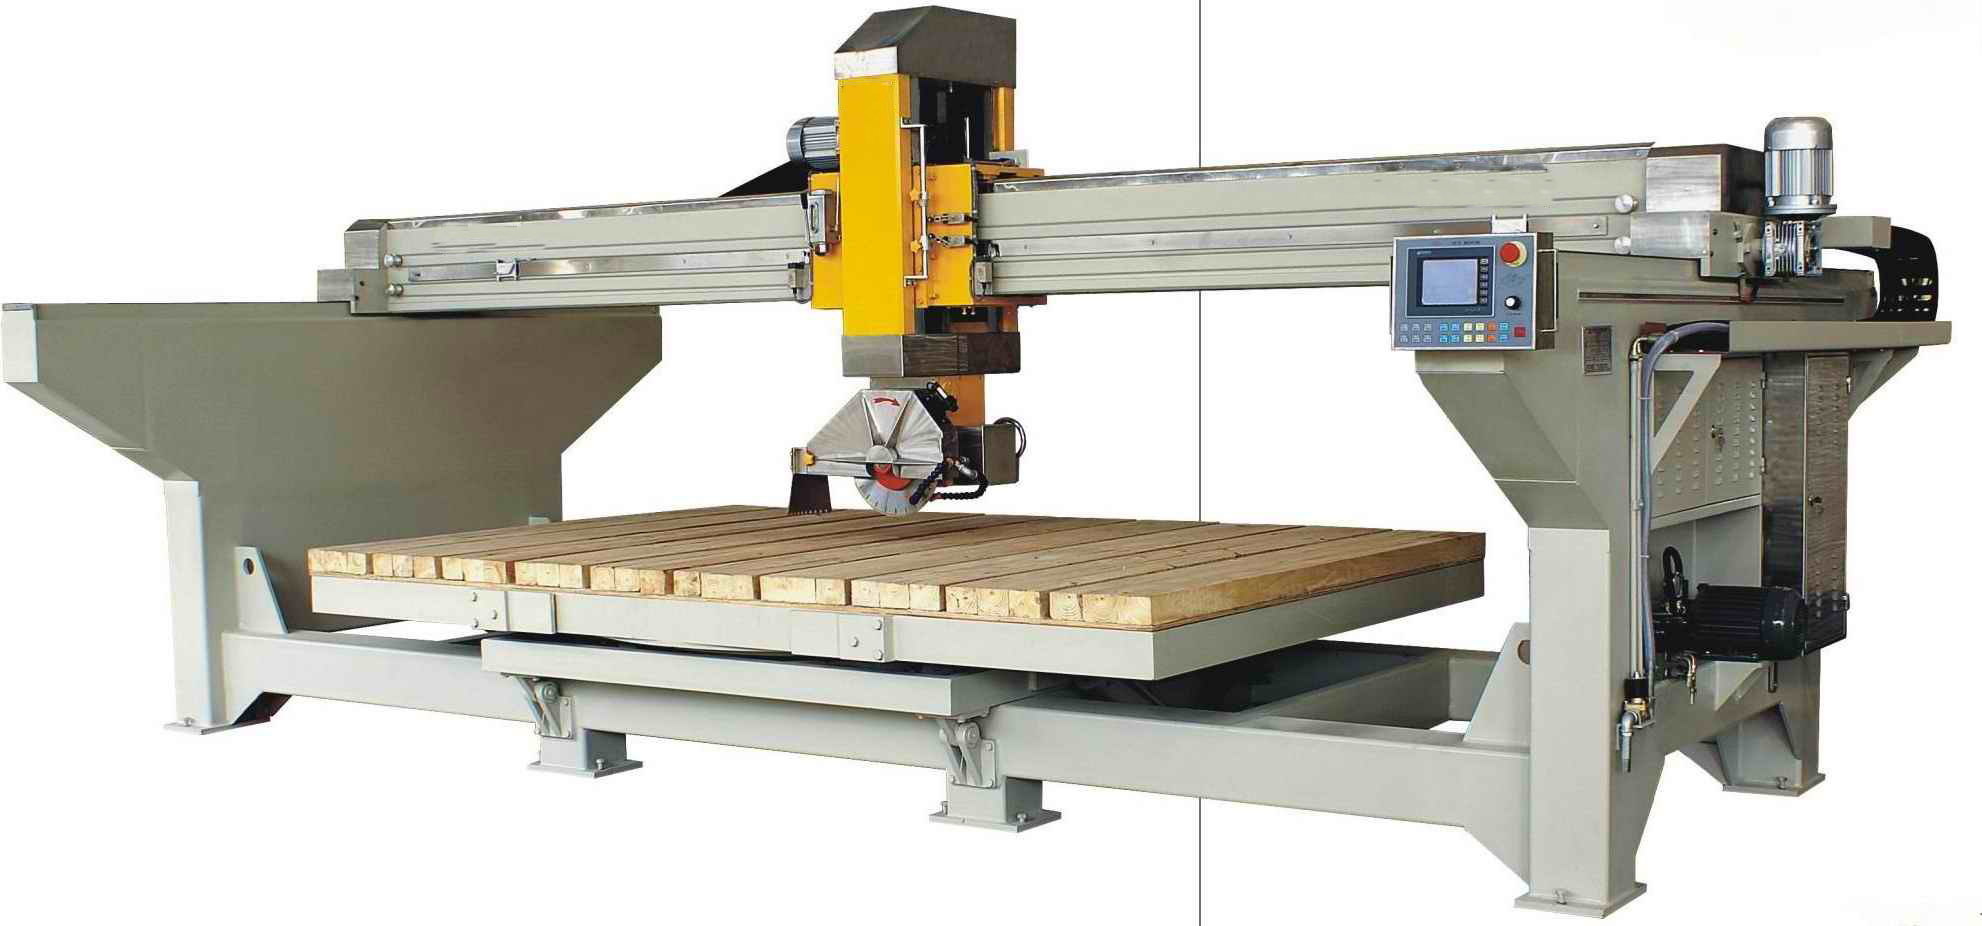 Automatic Bridge Saw with 45 Degree Table Tilting